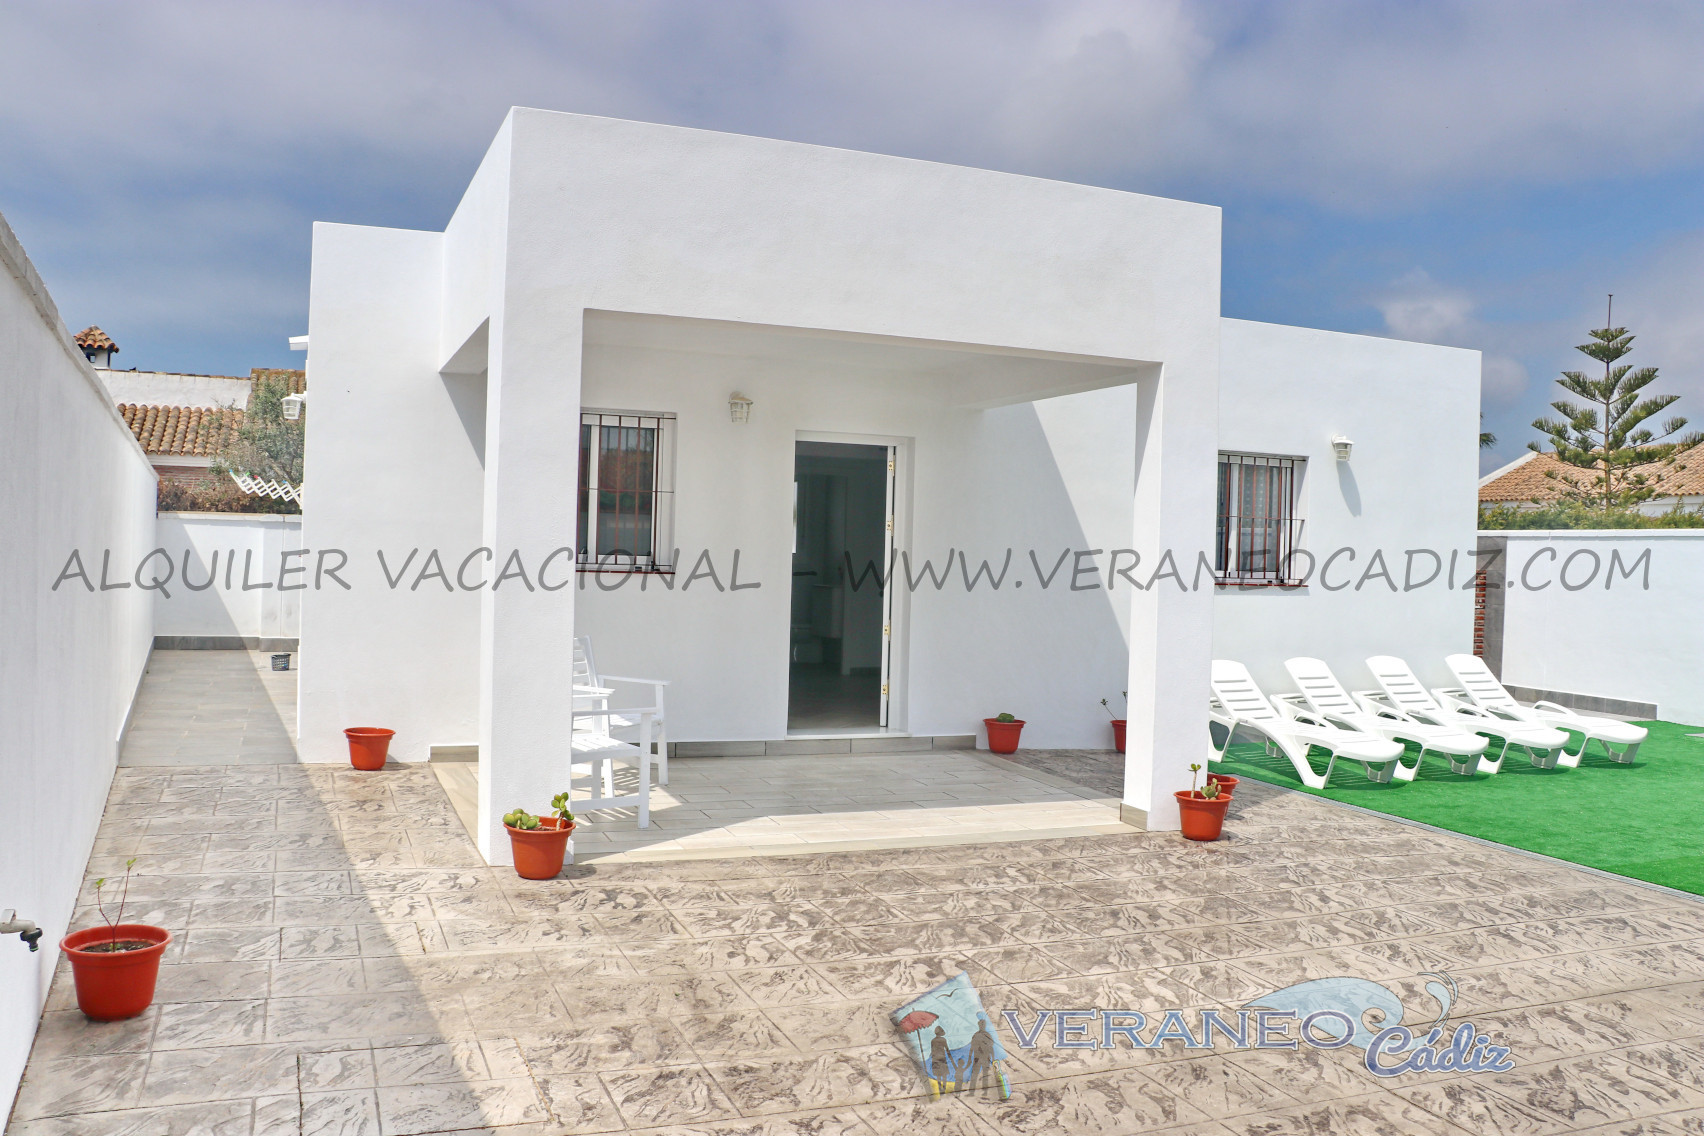 Alquiler chalet vacacional | Conil 409